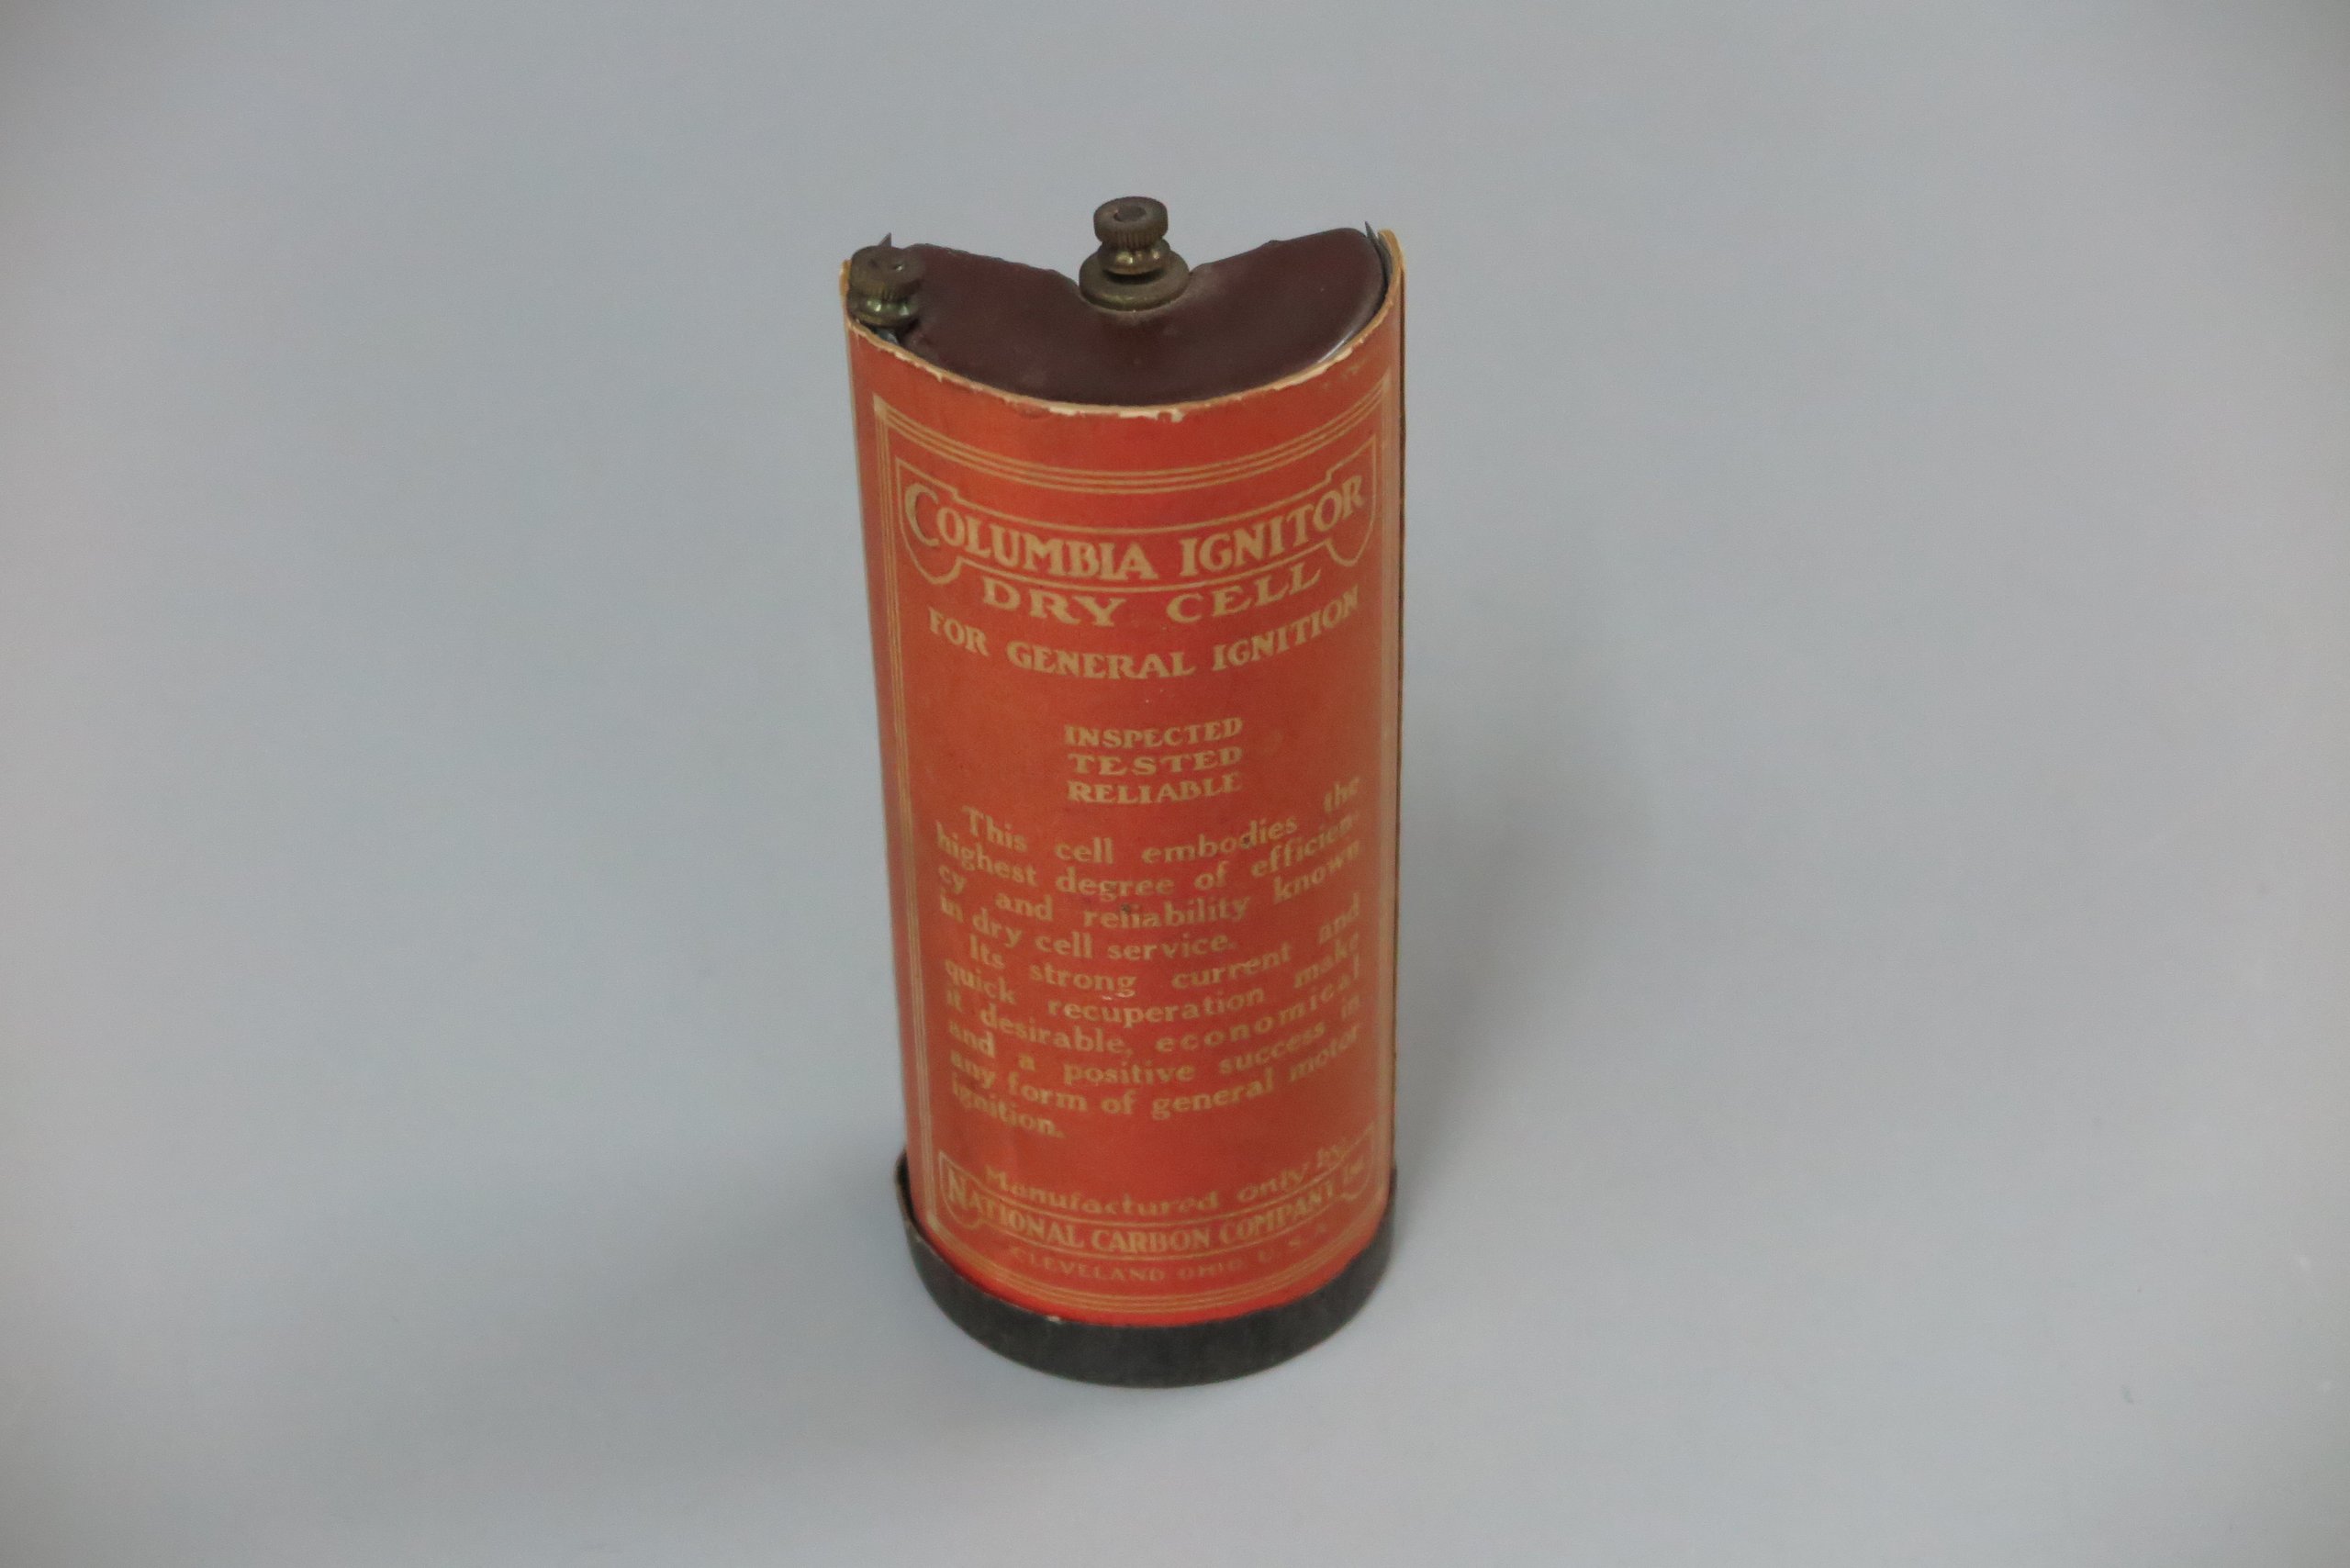 Battery sectioned to show its parts